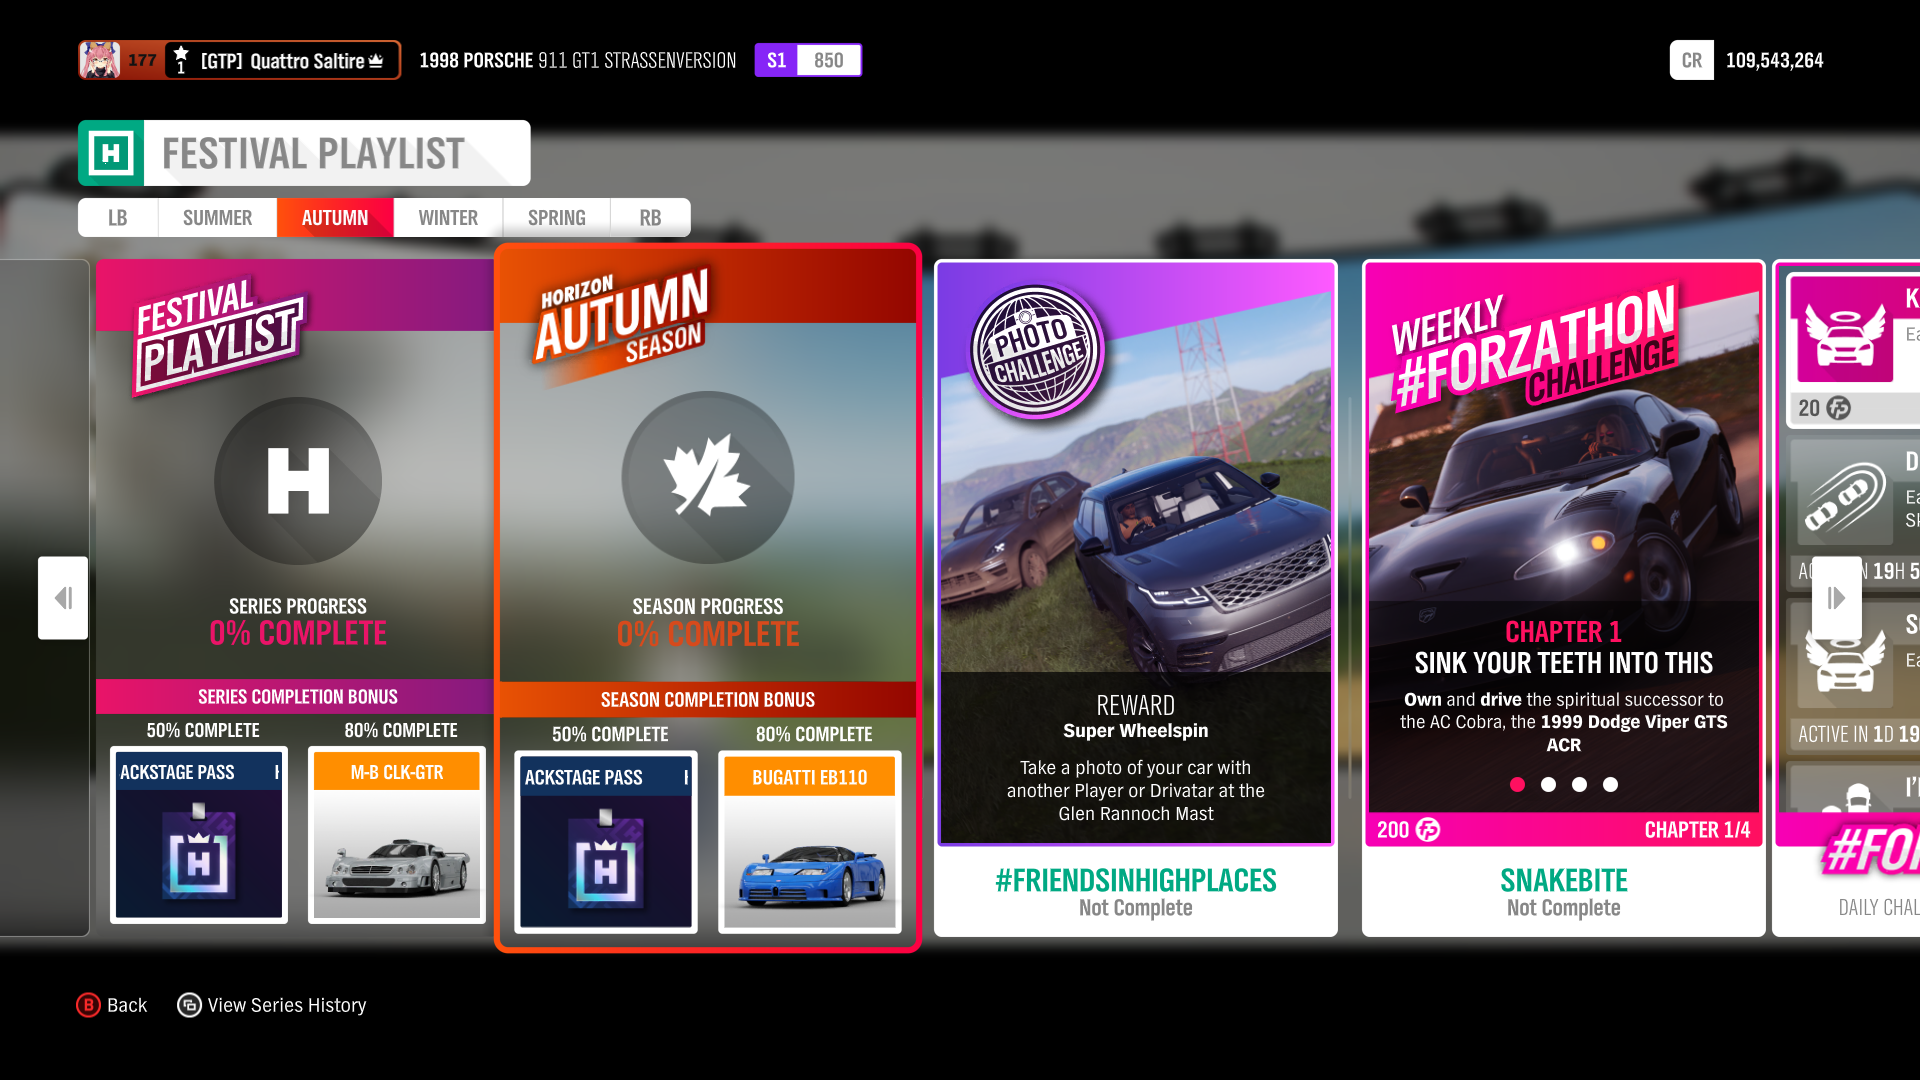 96 Top How to join a friend on forza horizon 4 Easy to Build